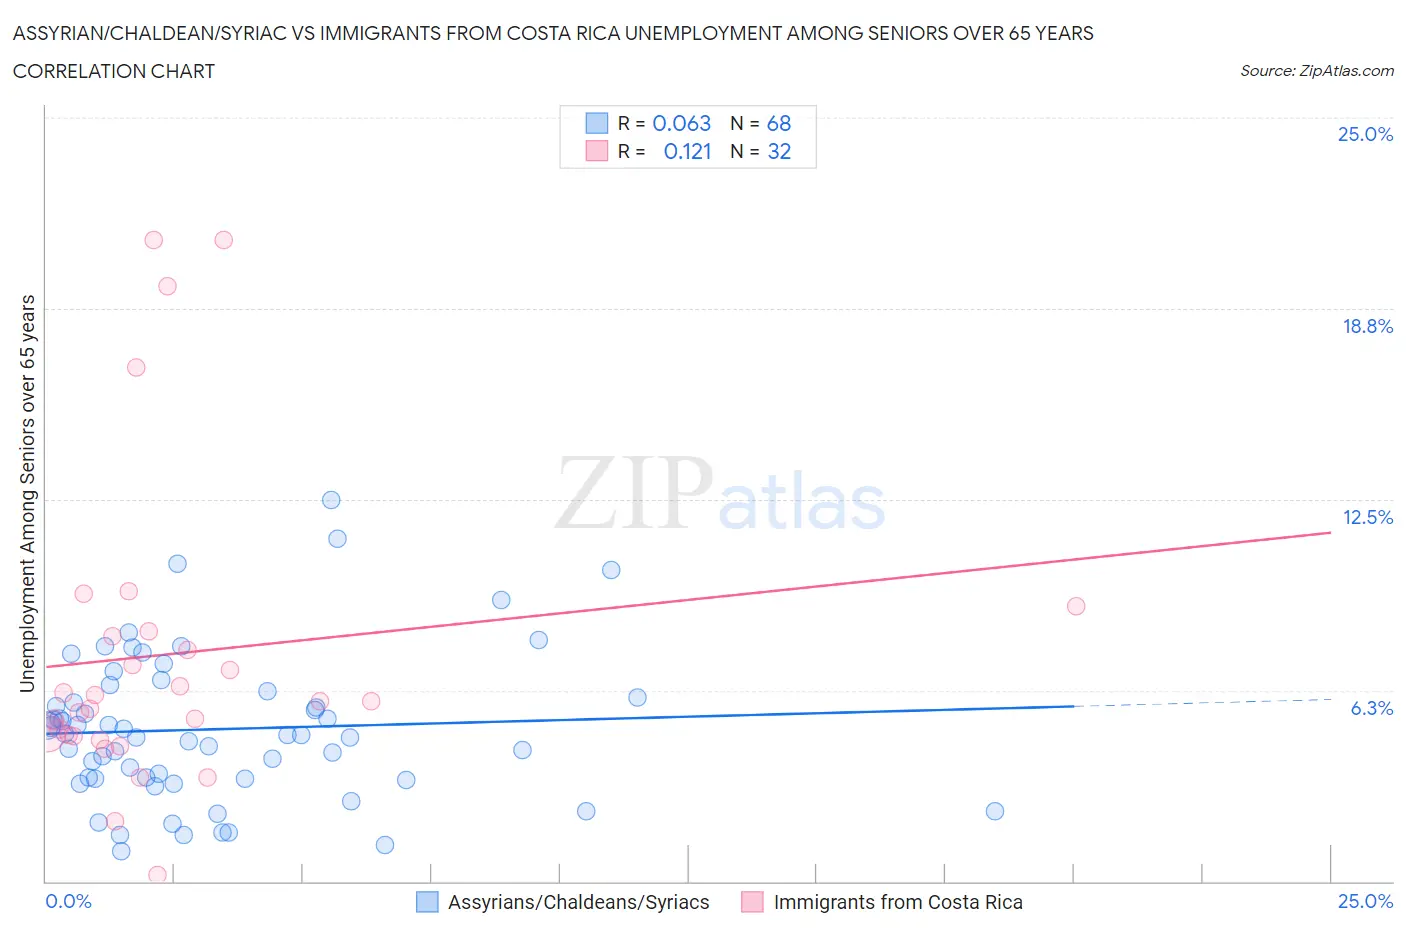 Assyrian/Chaldean/Syriac vs Immigrants from Costa Rica Unemployment Among Seniors over 65 years